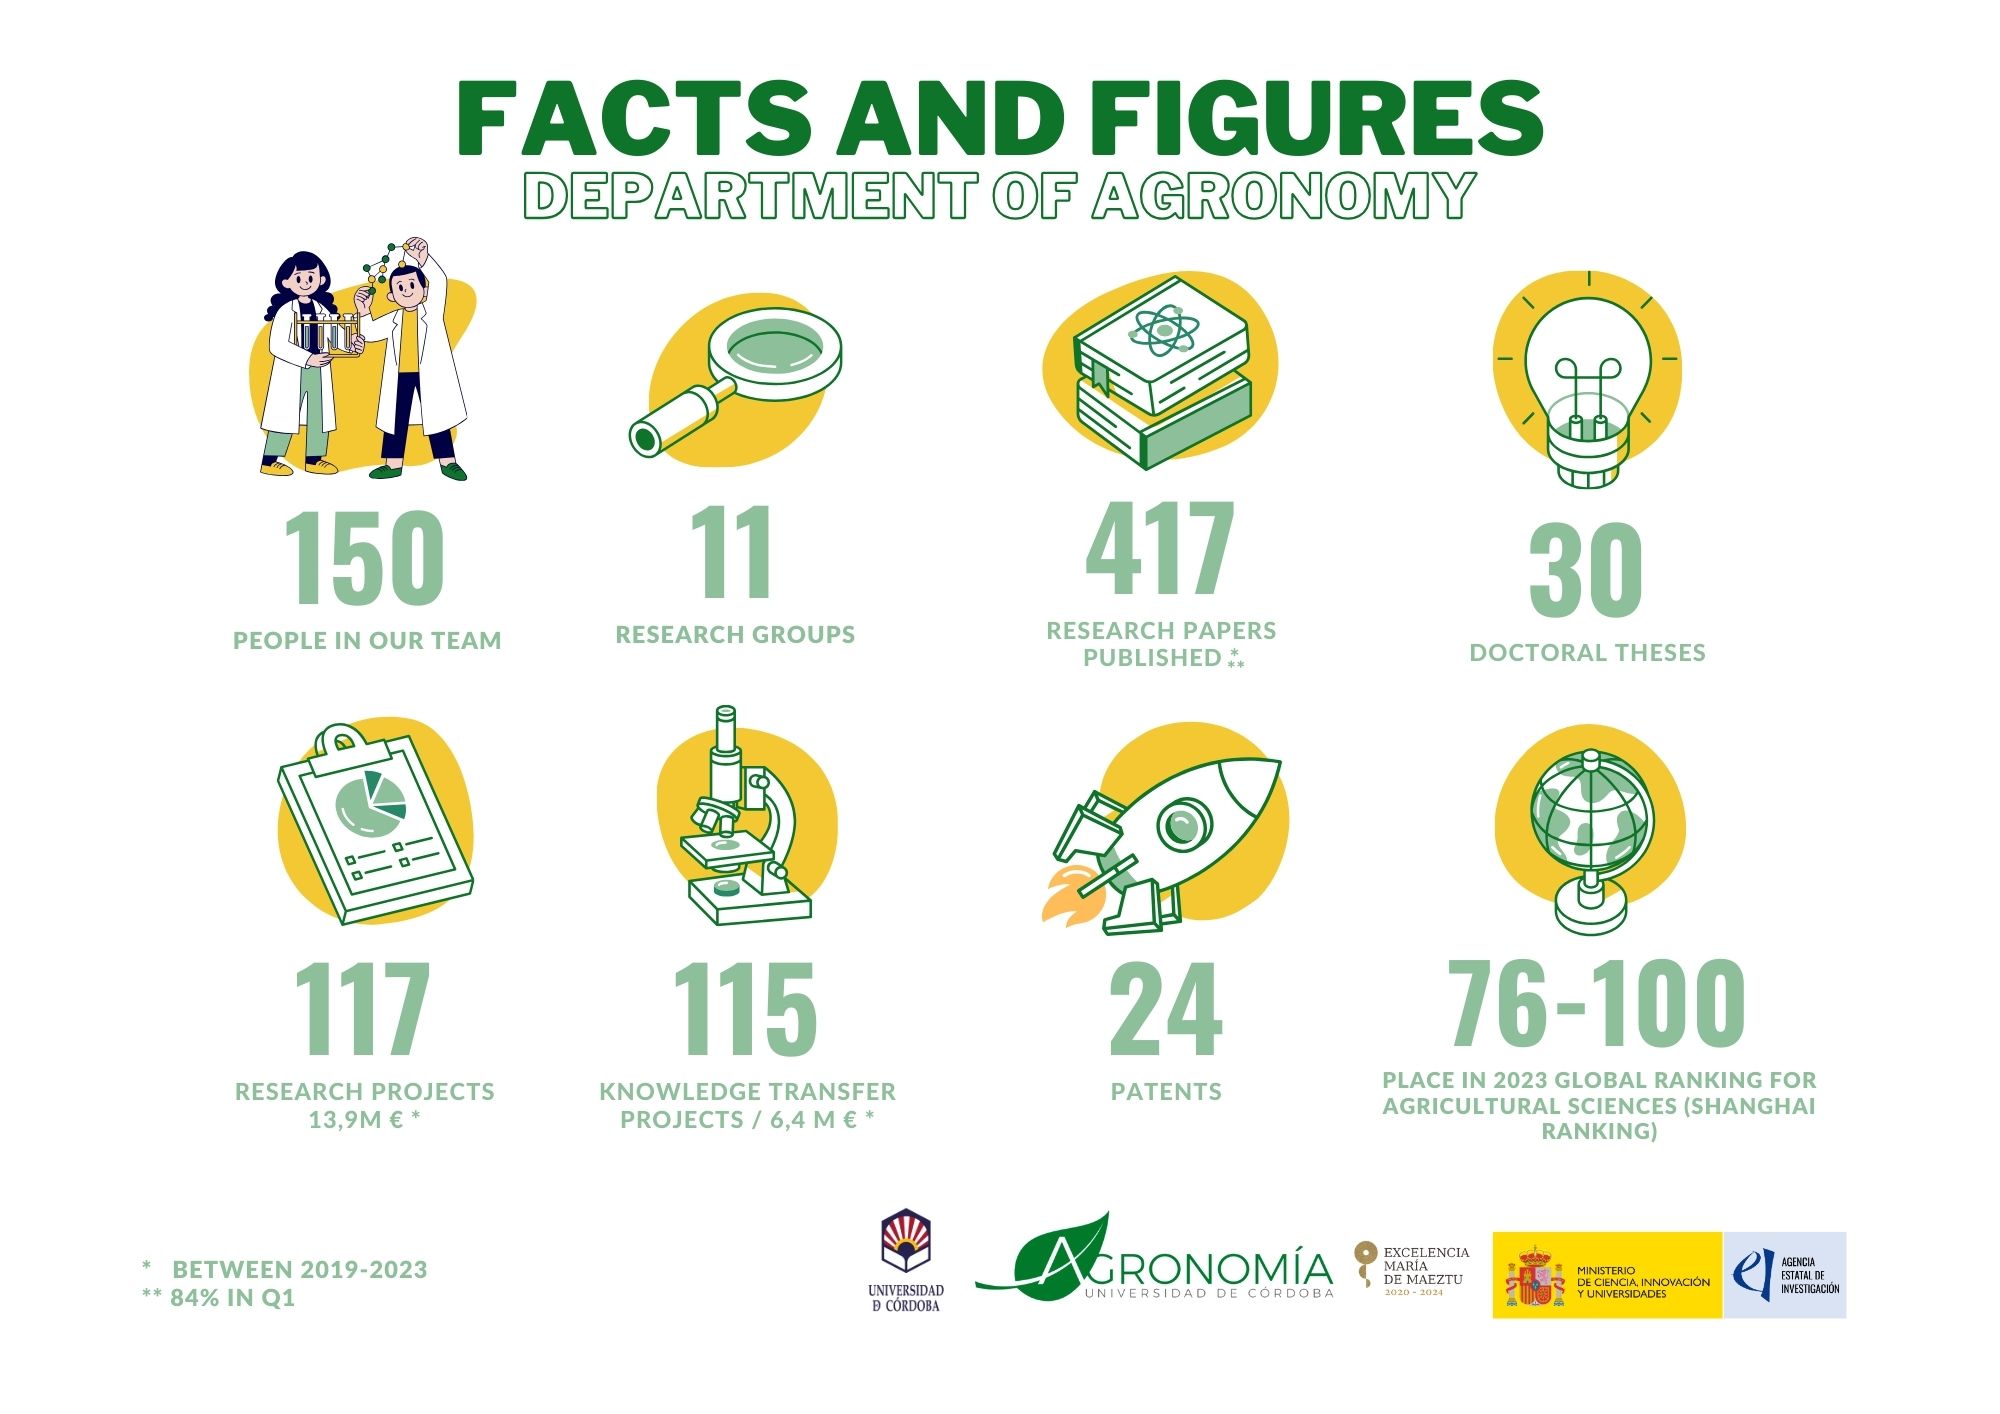 FACTS AND FIGURES nuevo